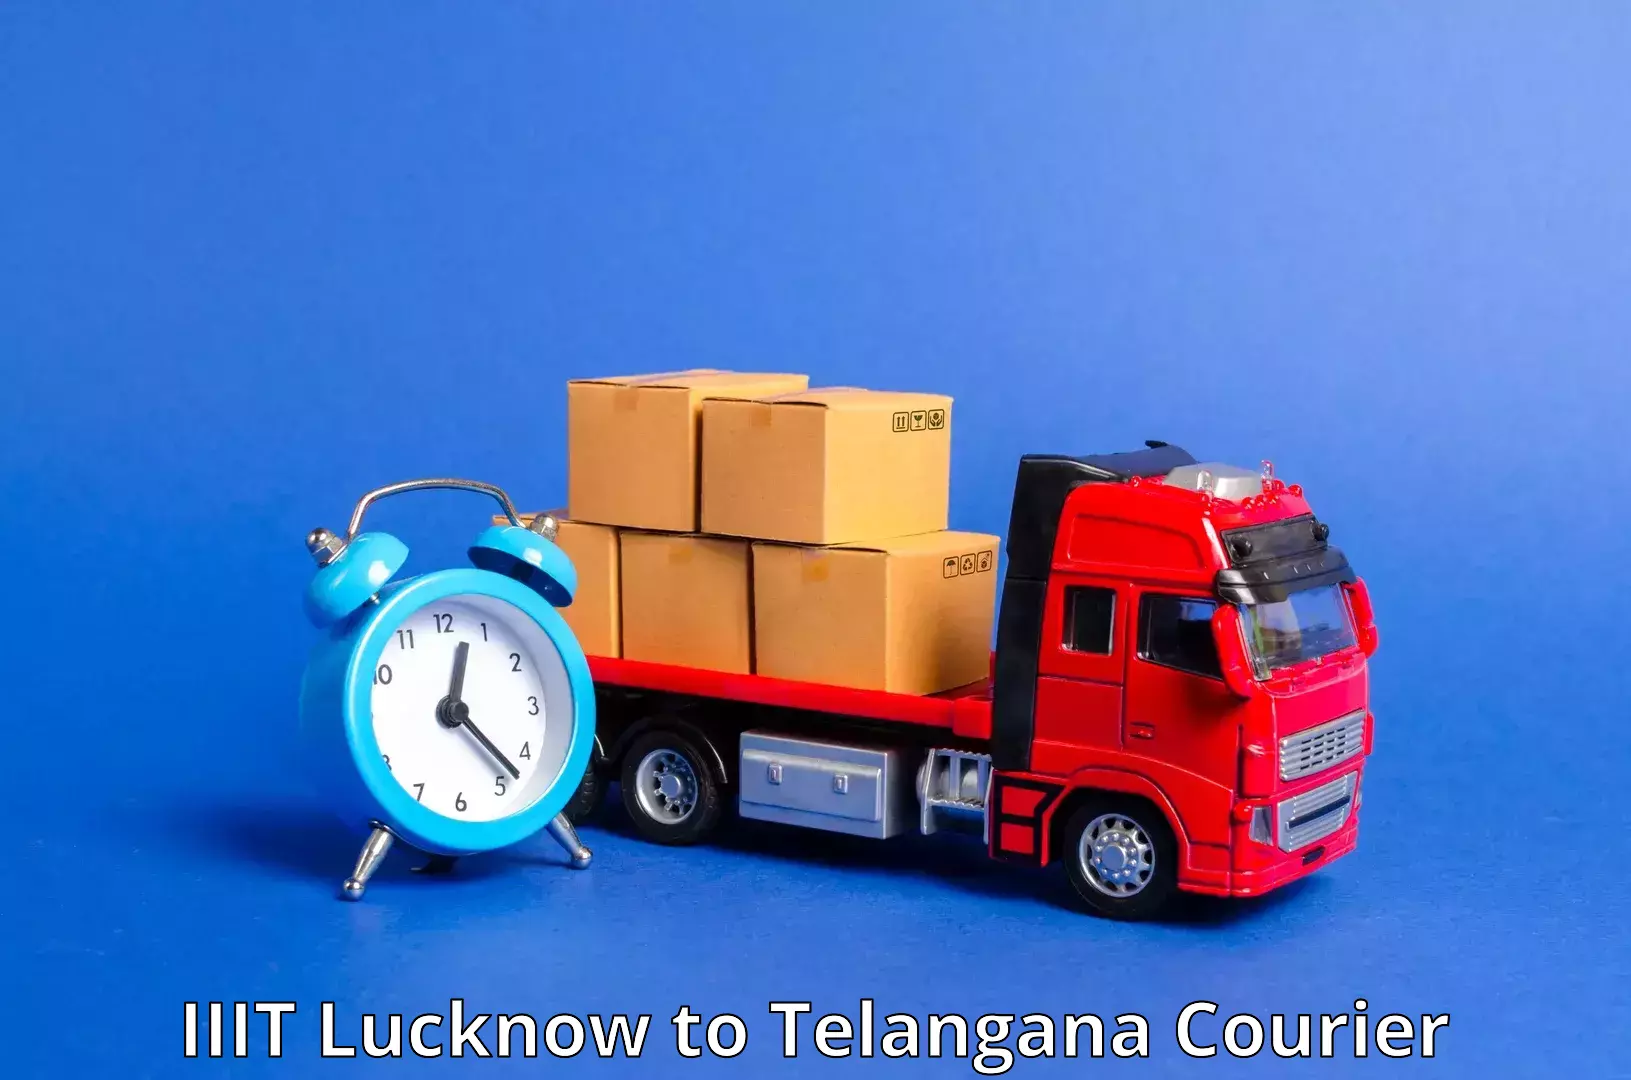 Global shipping networks IIIT Lucknow to Warangal